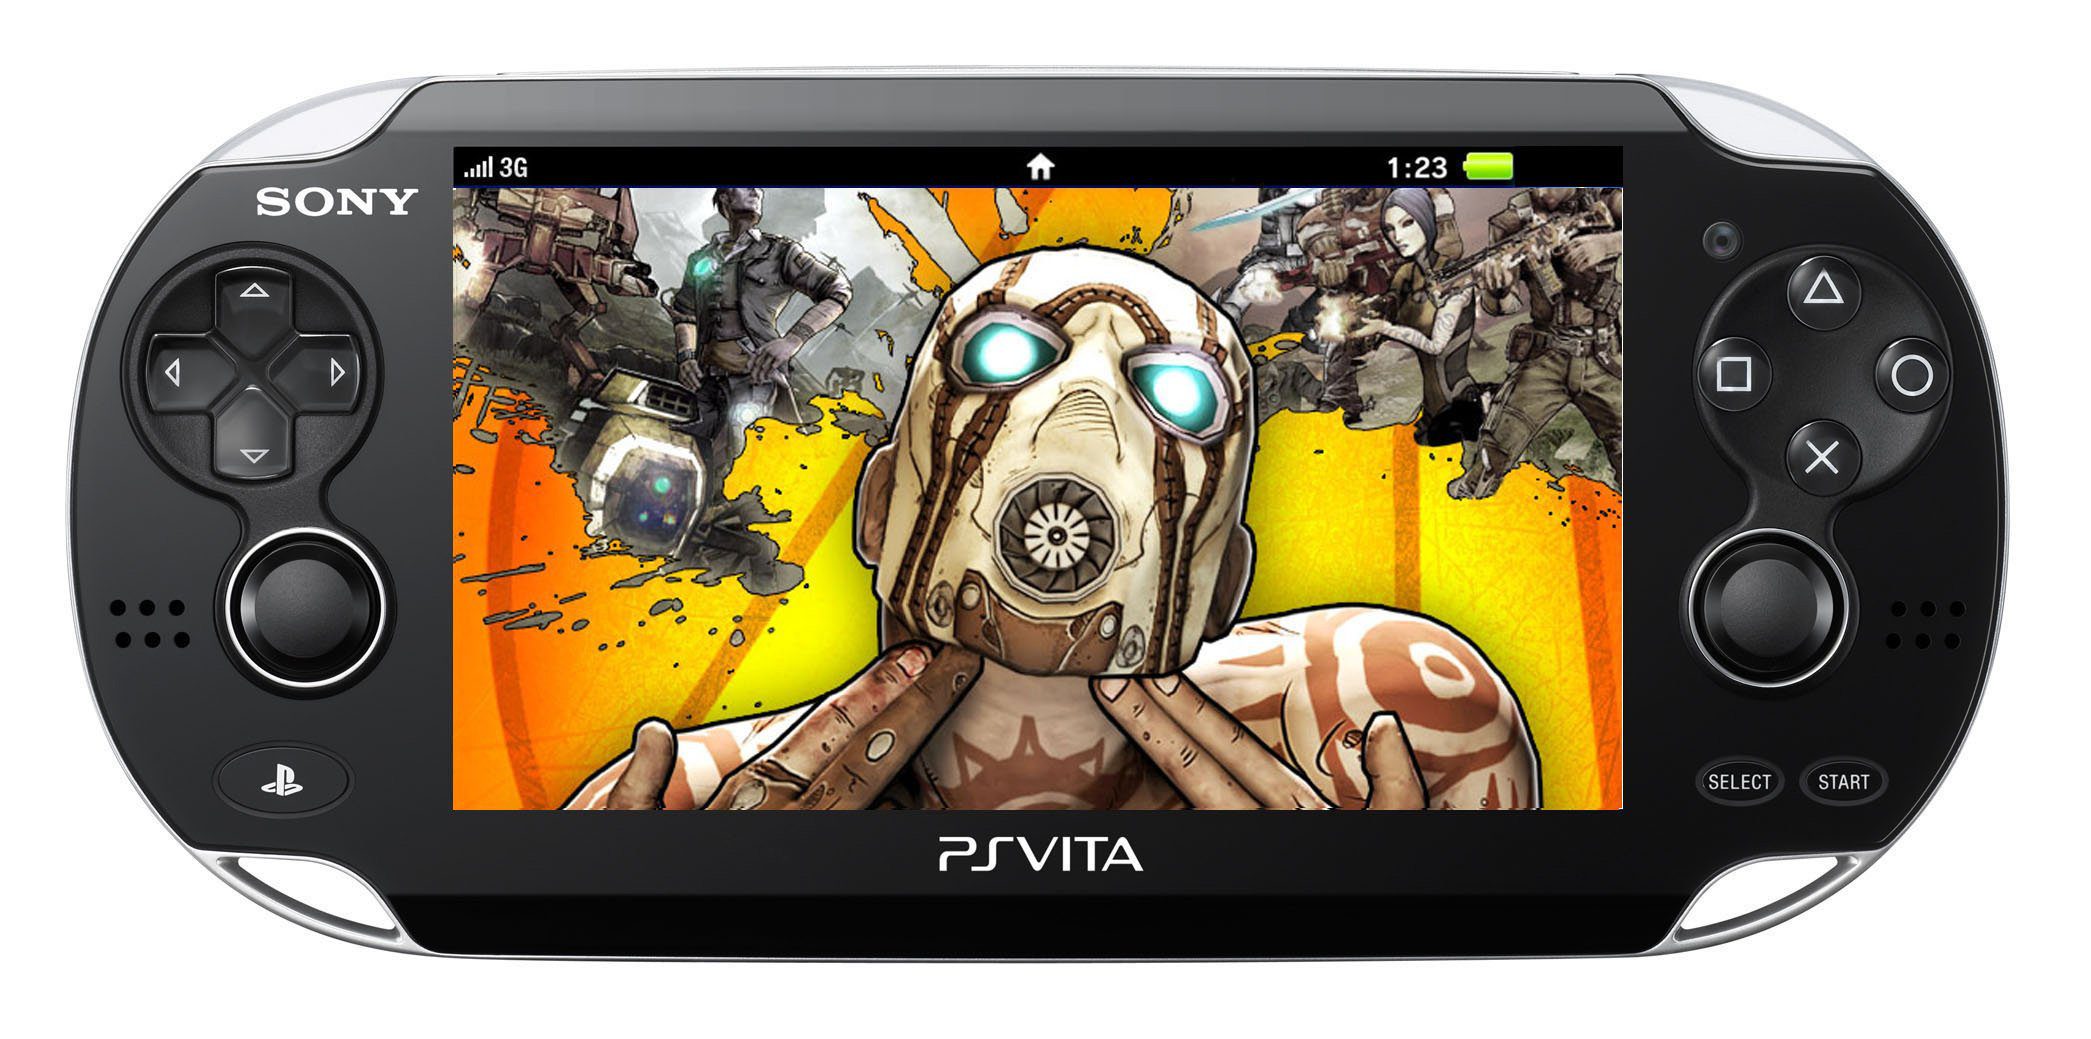 can ps3 games be play on ps vita emulator